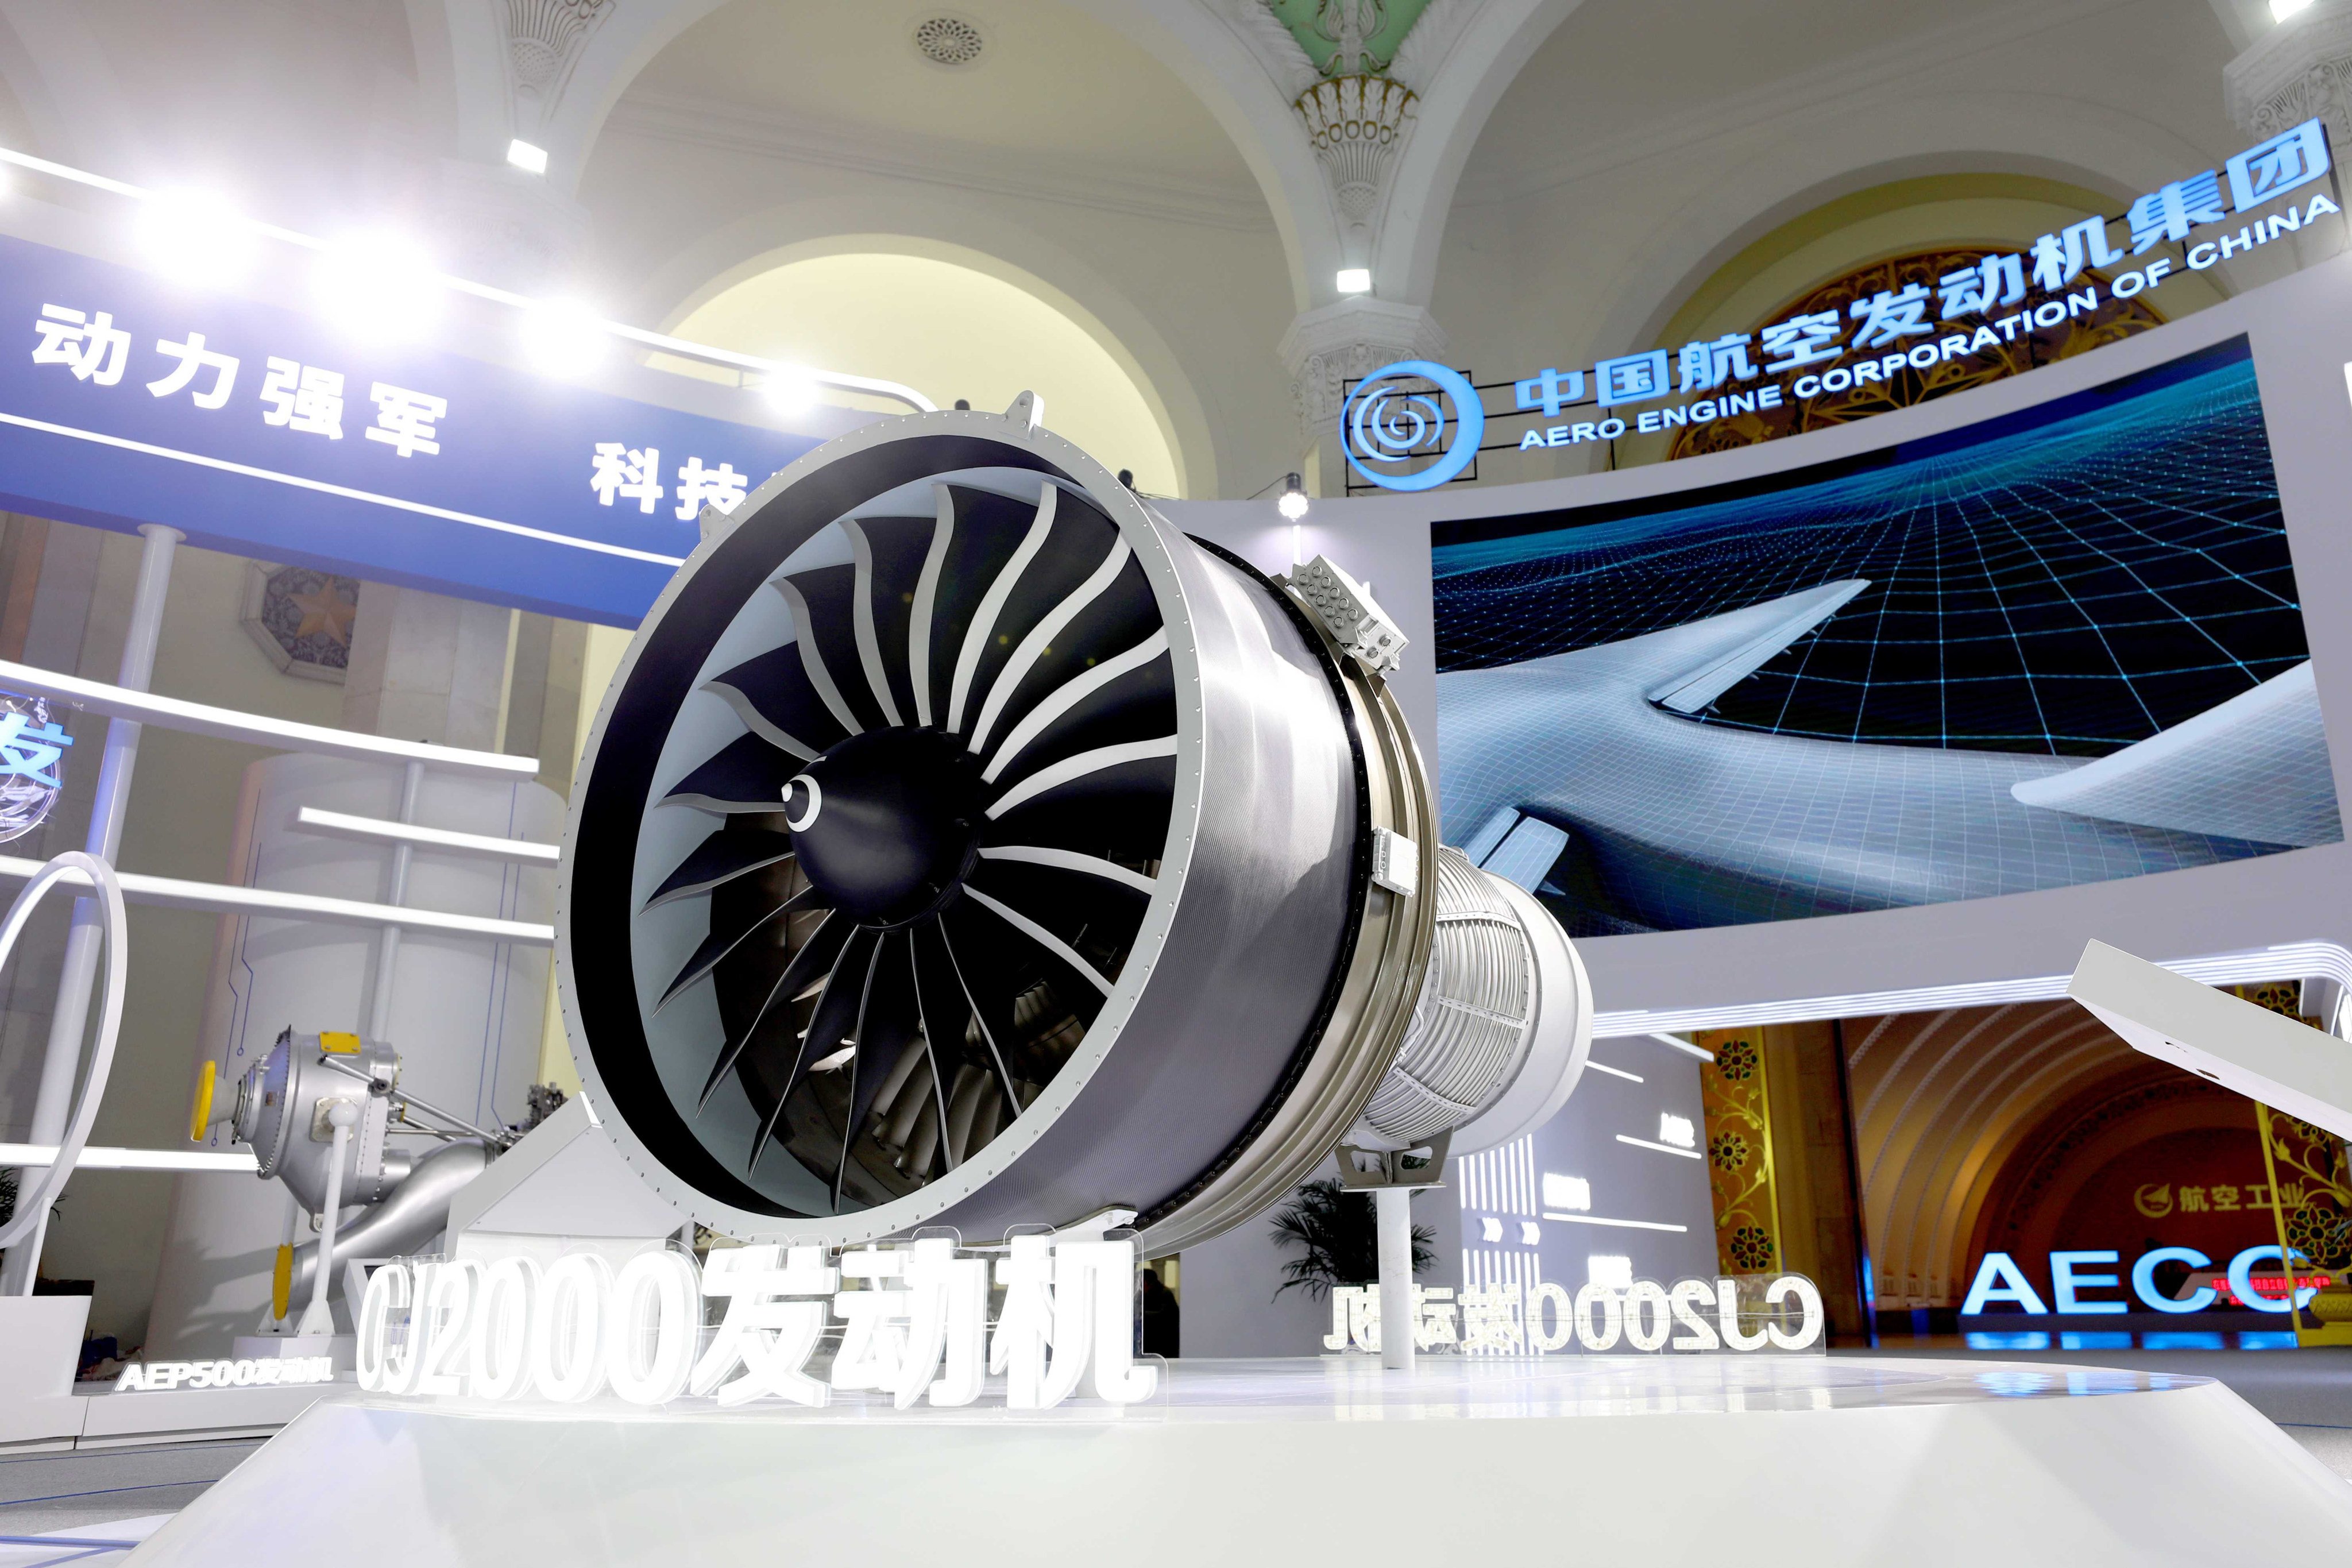 Aero Engine Corporation of China’s CJ2000 engine is one of several domestically produced aircraft power sources on display in Shanghai. Photo: Shanghai International Commercial Airshow